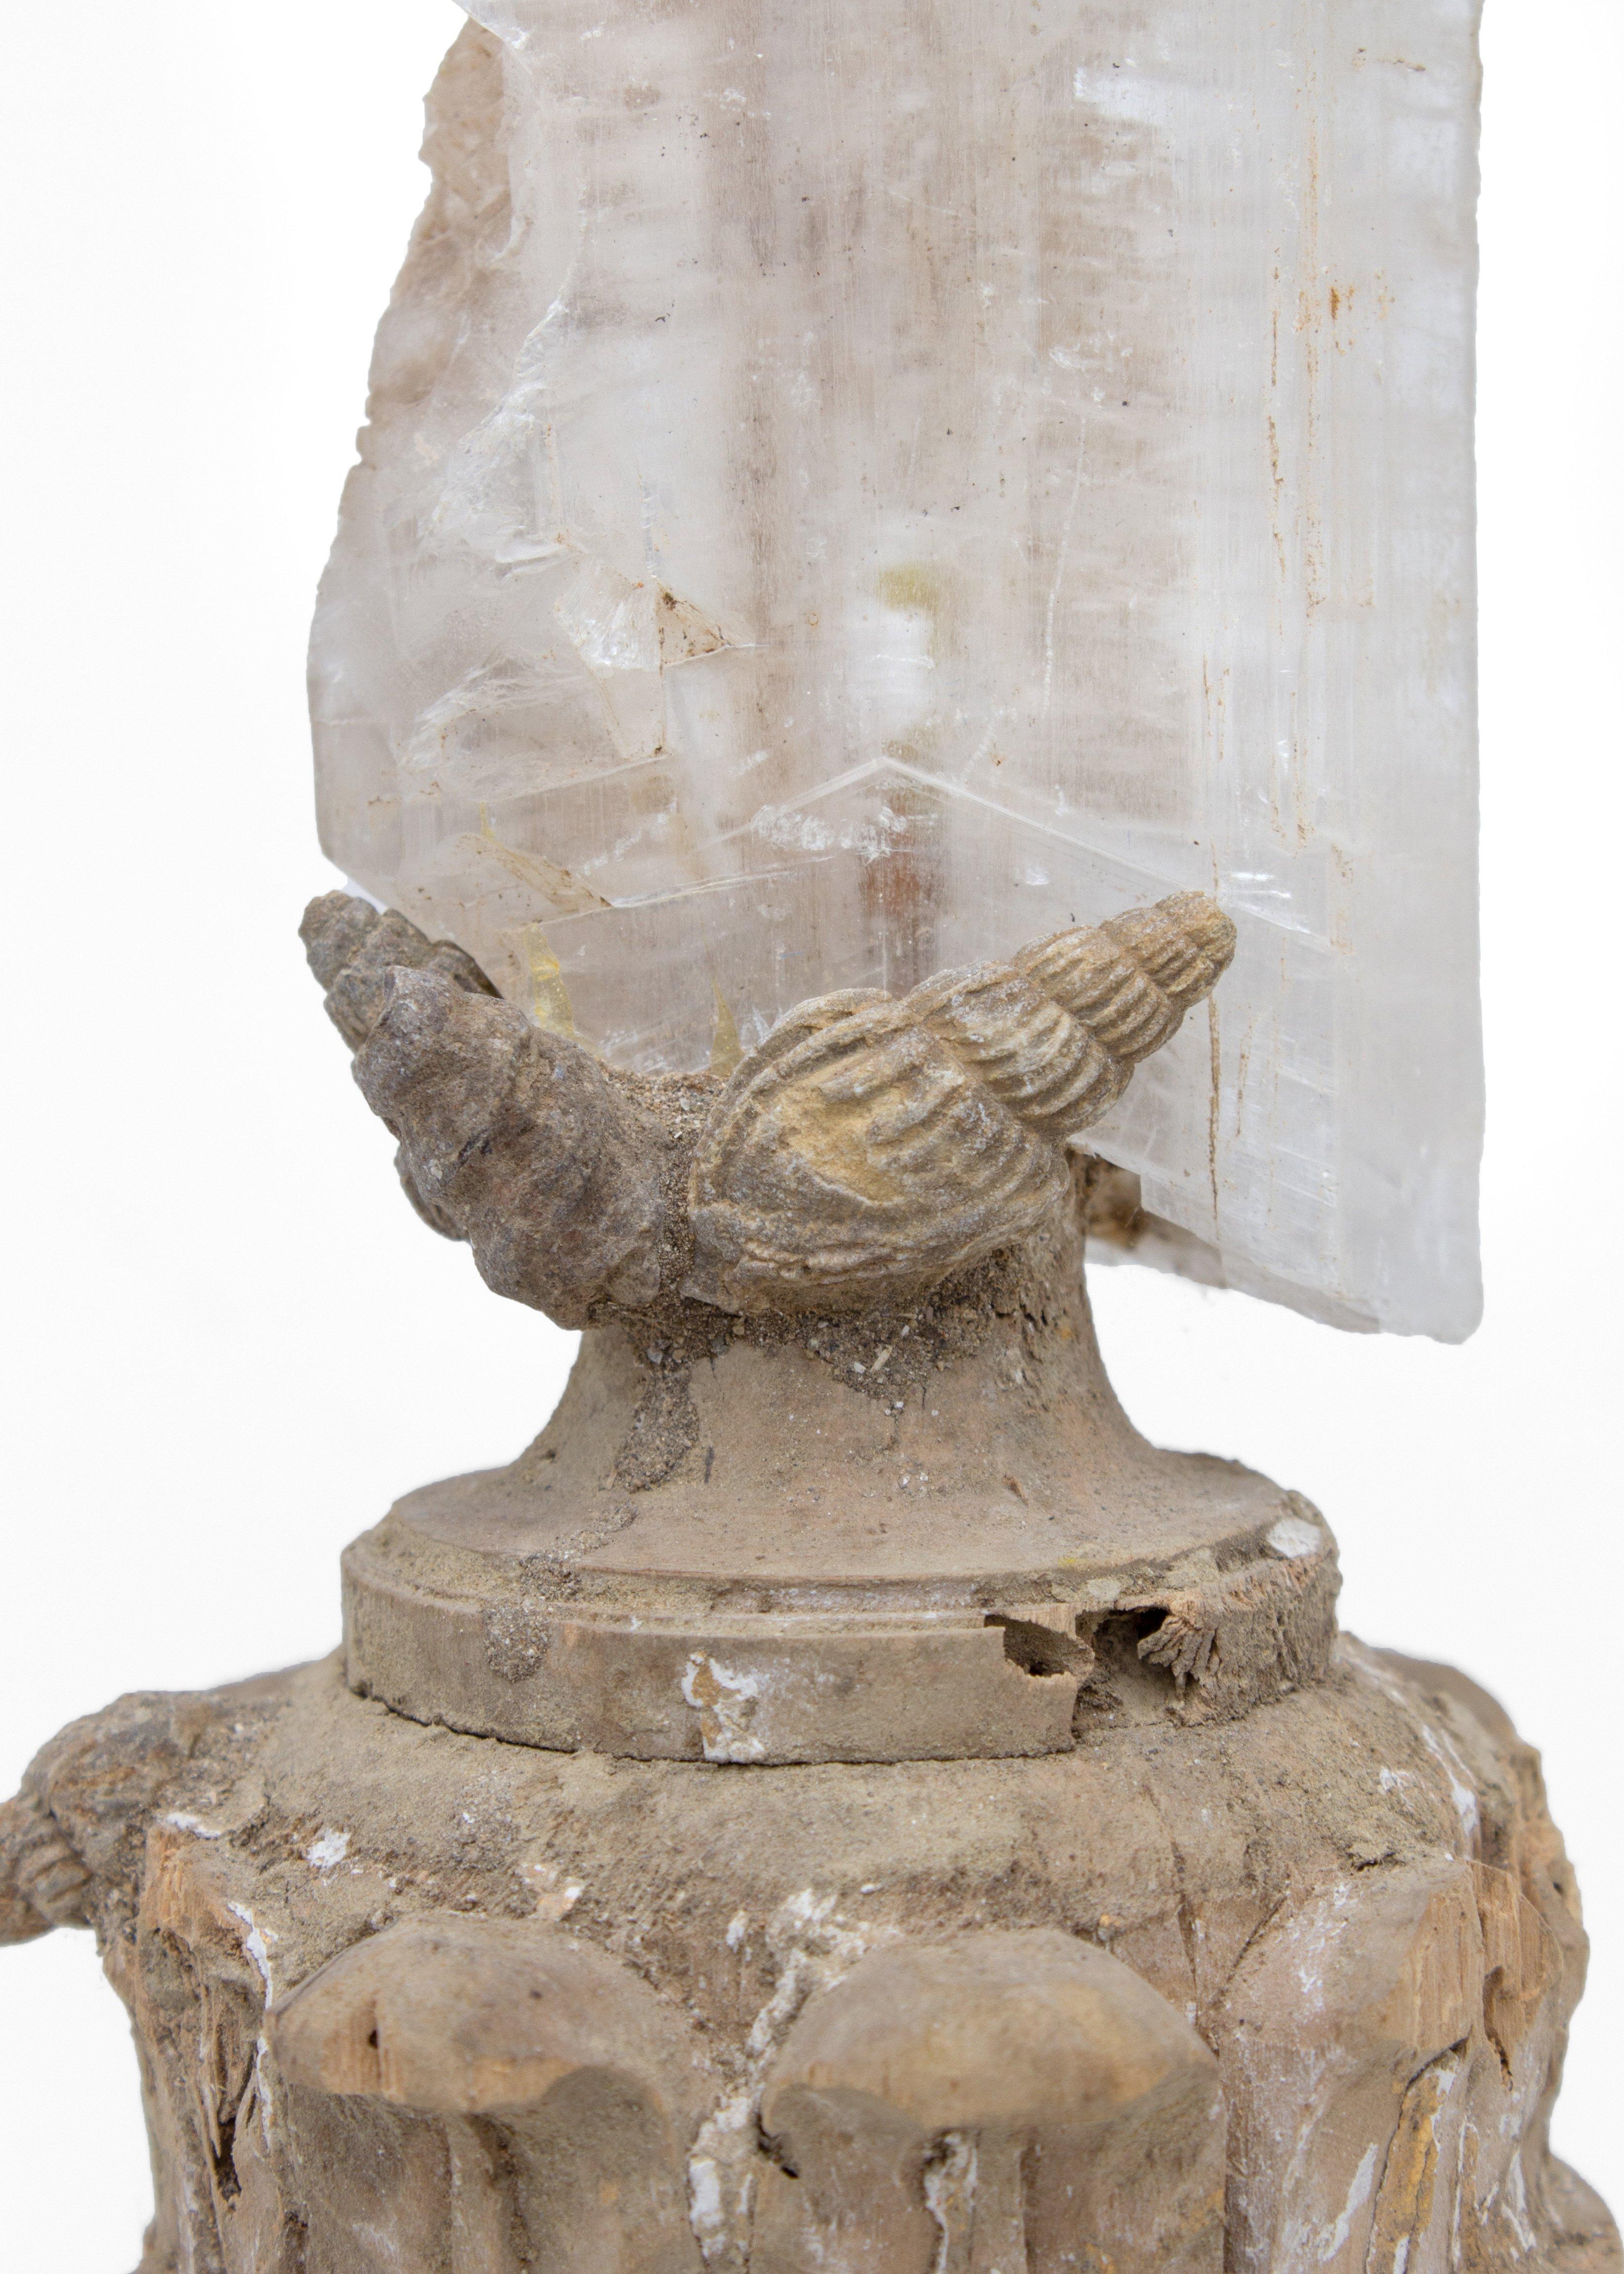 Baroque 17th Century Italian Candlestick Base with a Selenite Blade and Fossil Shells